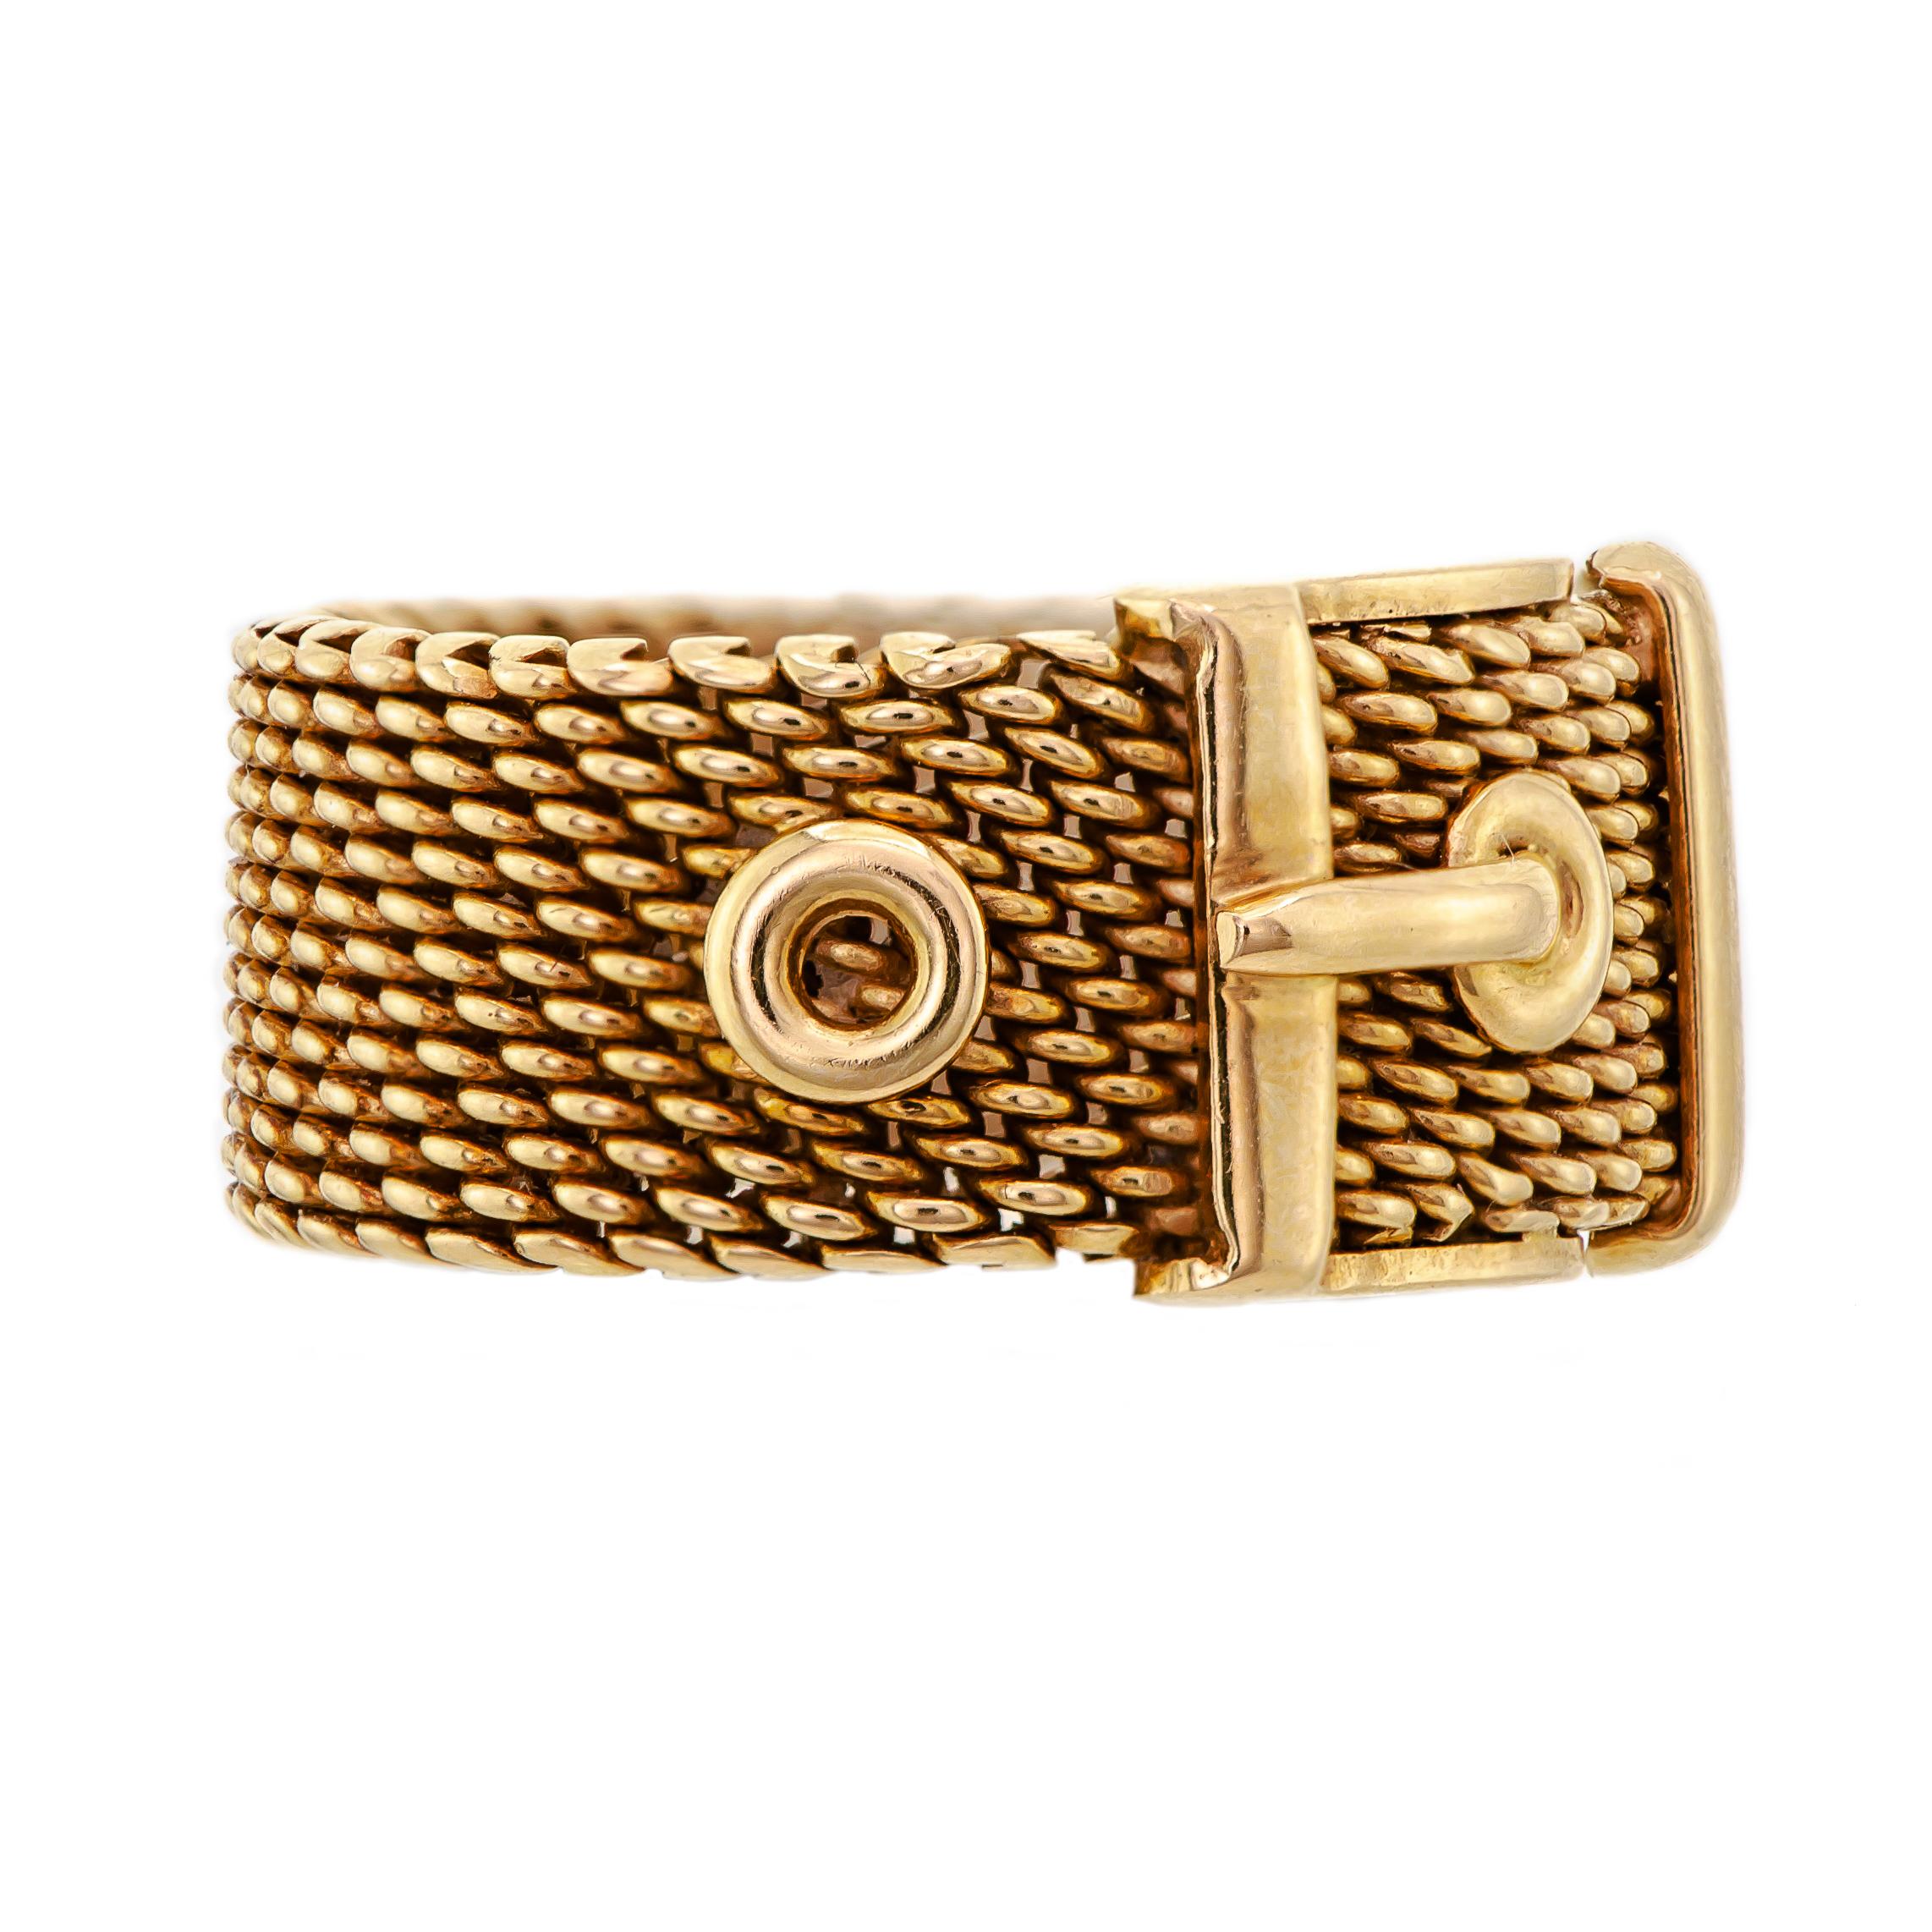 A delightful vintage 18K yellow gold flexible mesh belt band ring featuring a fun buckle design. This ring measures approximately 3/8